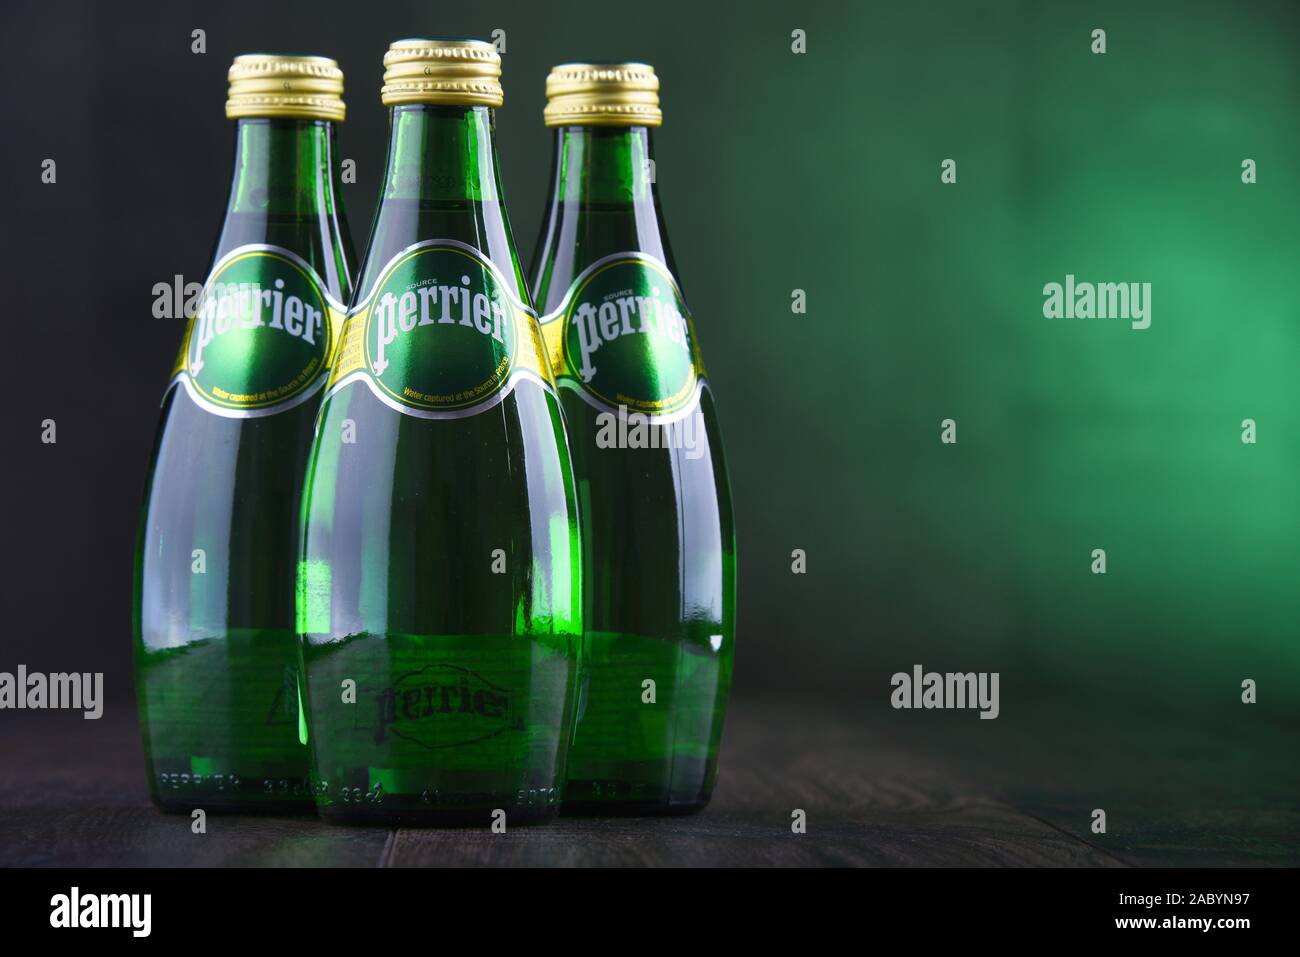 POZNAN, POL - JAN 24, 2019: Bottles of Perrier, a French brand of natural bottled mineral water sold worldwide and available in 140 countries. Stock Photo